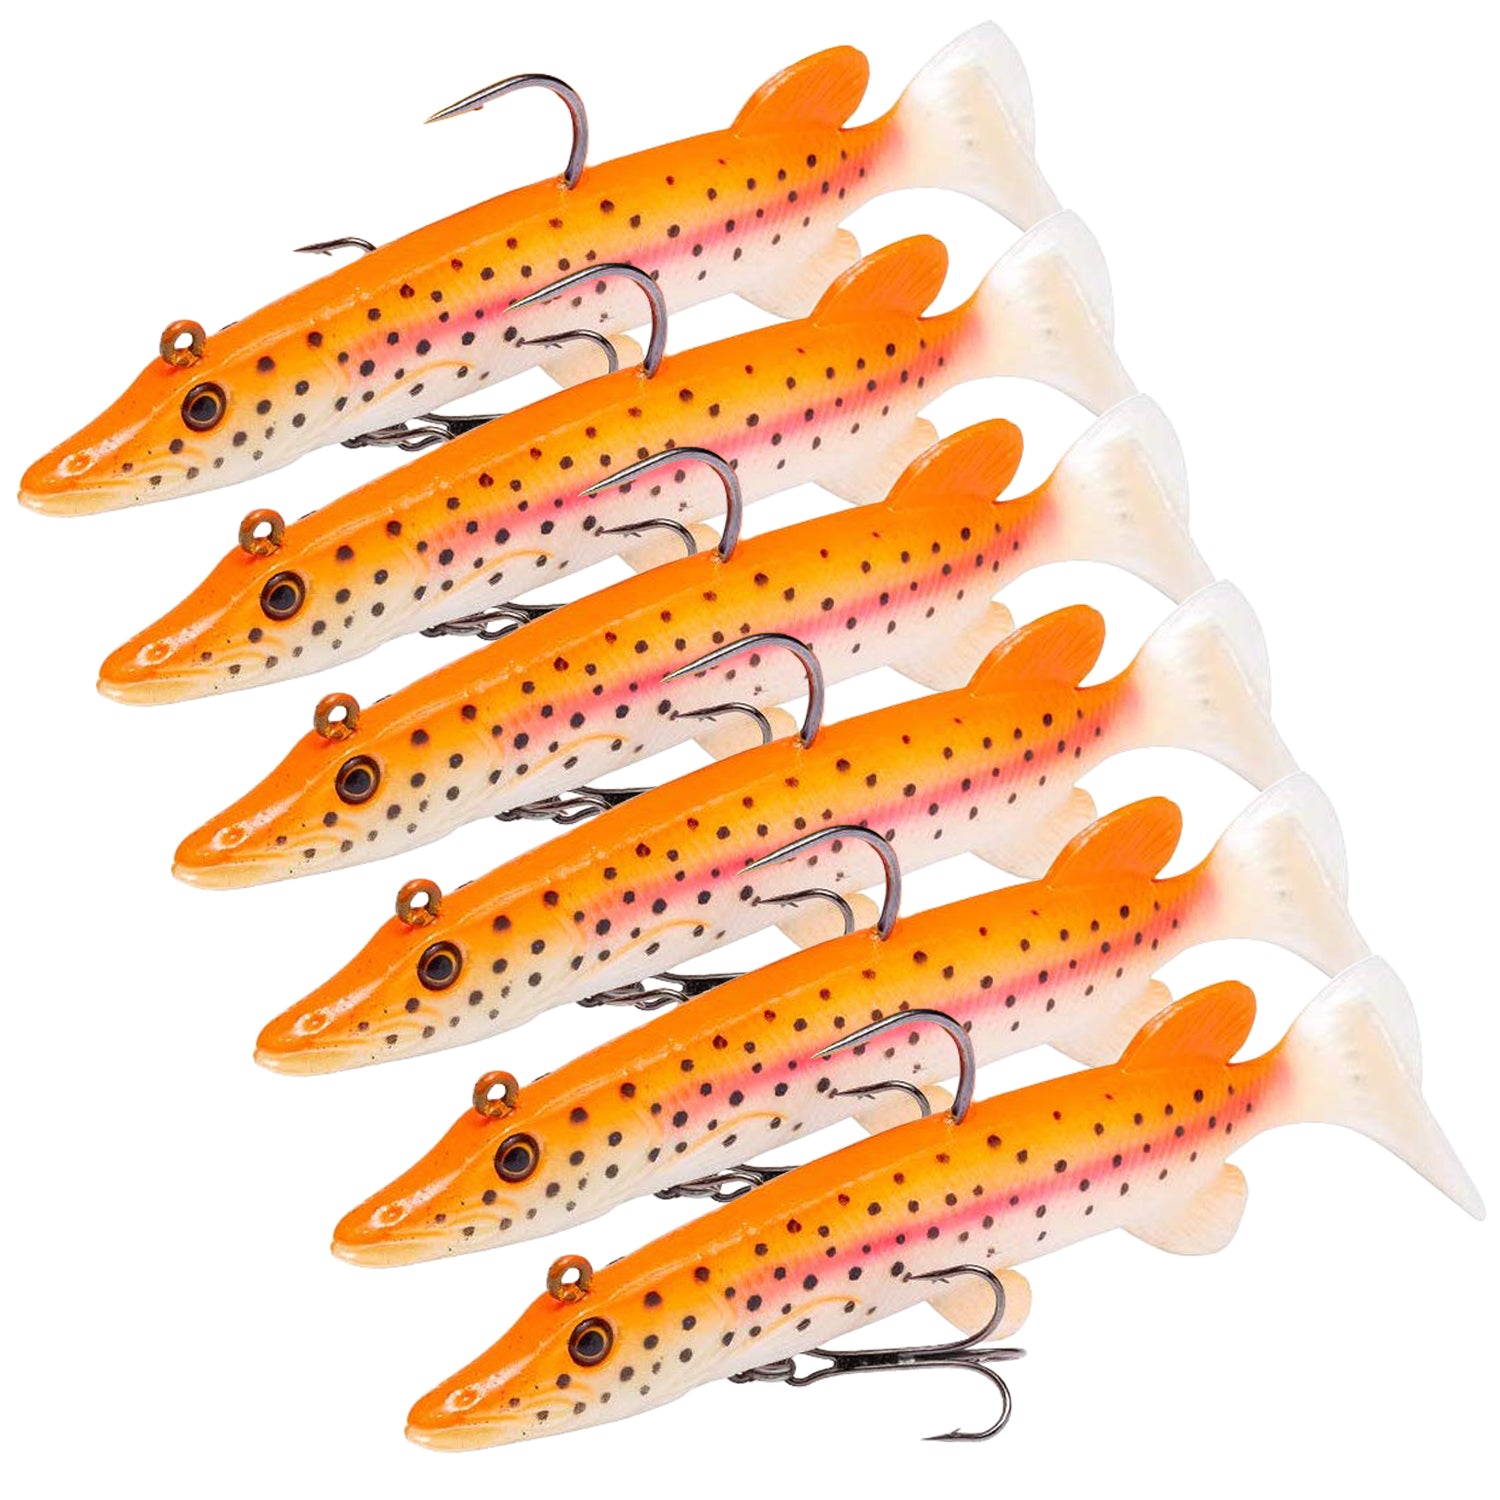 Savage Gear 3D Real Trout - Light Trout - 7in